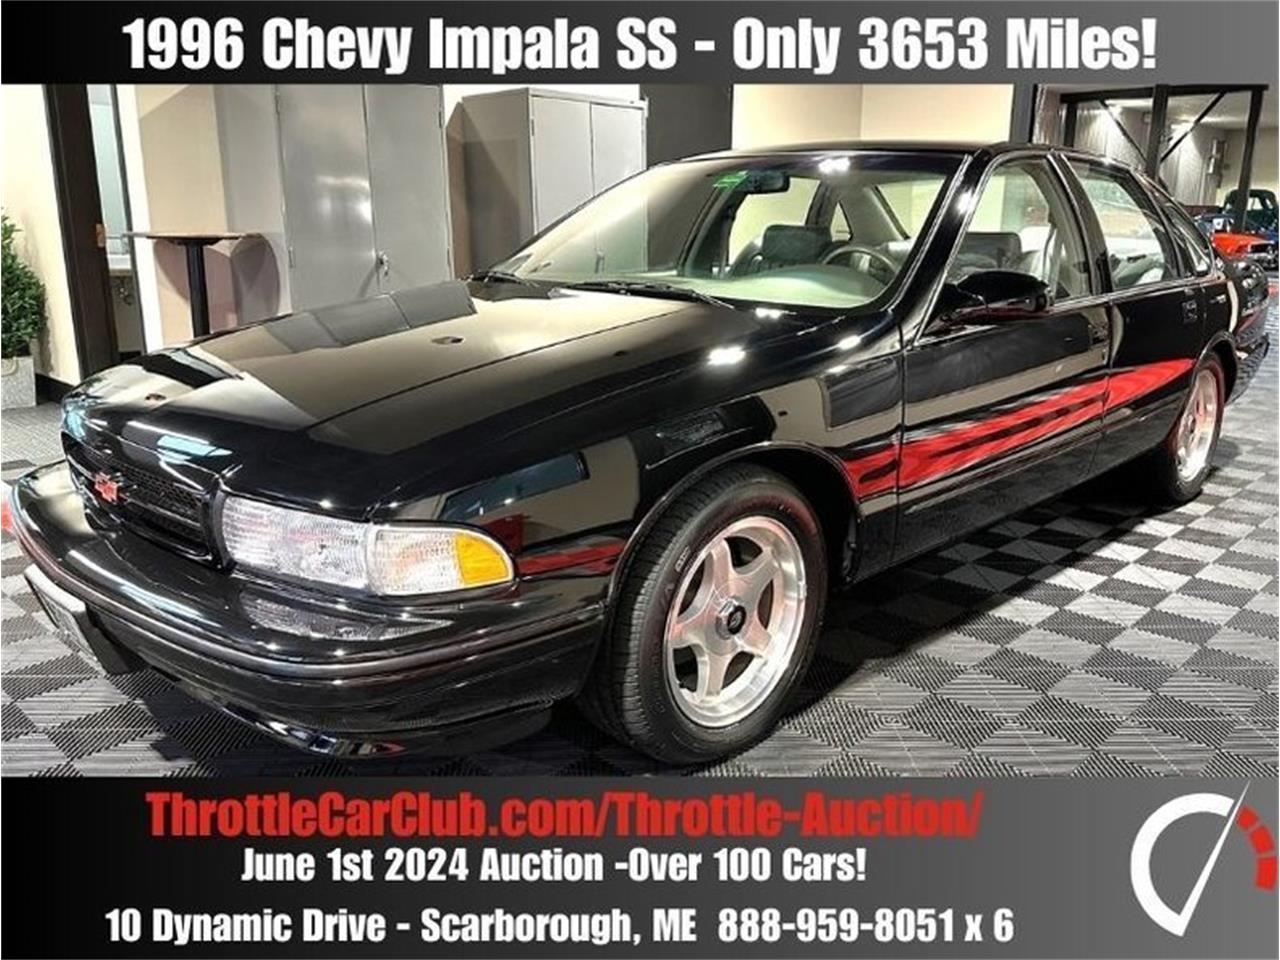 For Sale at Auction: 1996 Chevrolet Impala in Scarborough, Maine